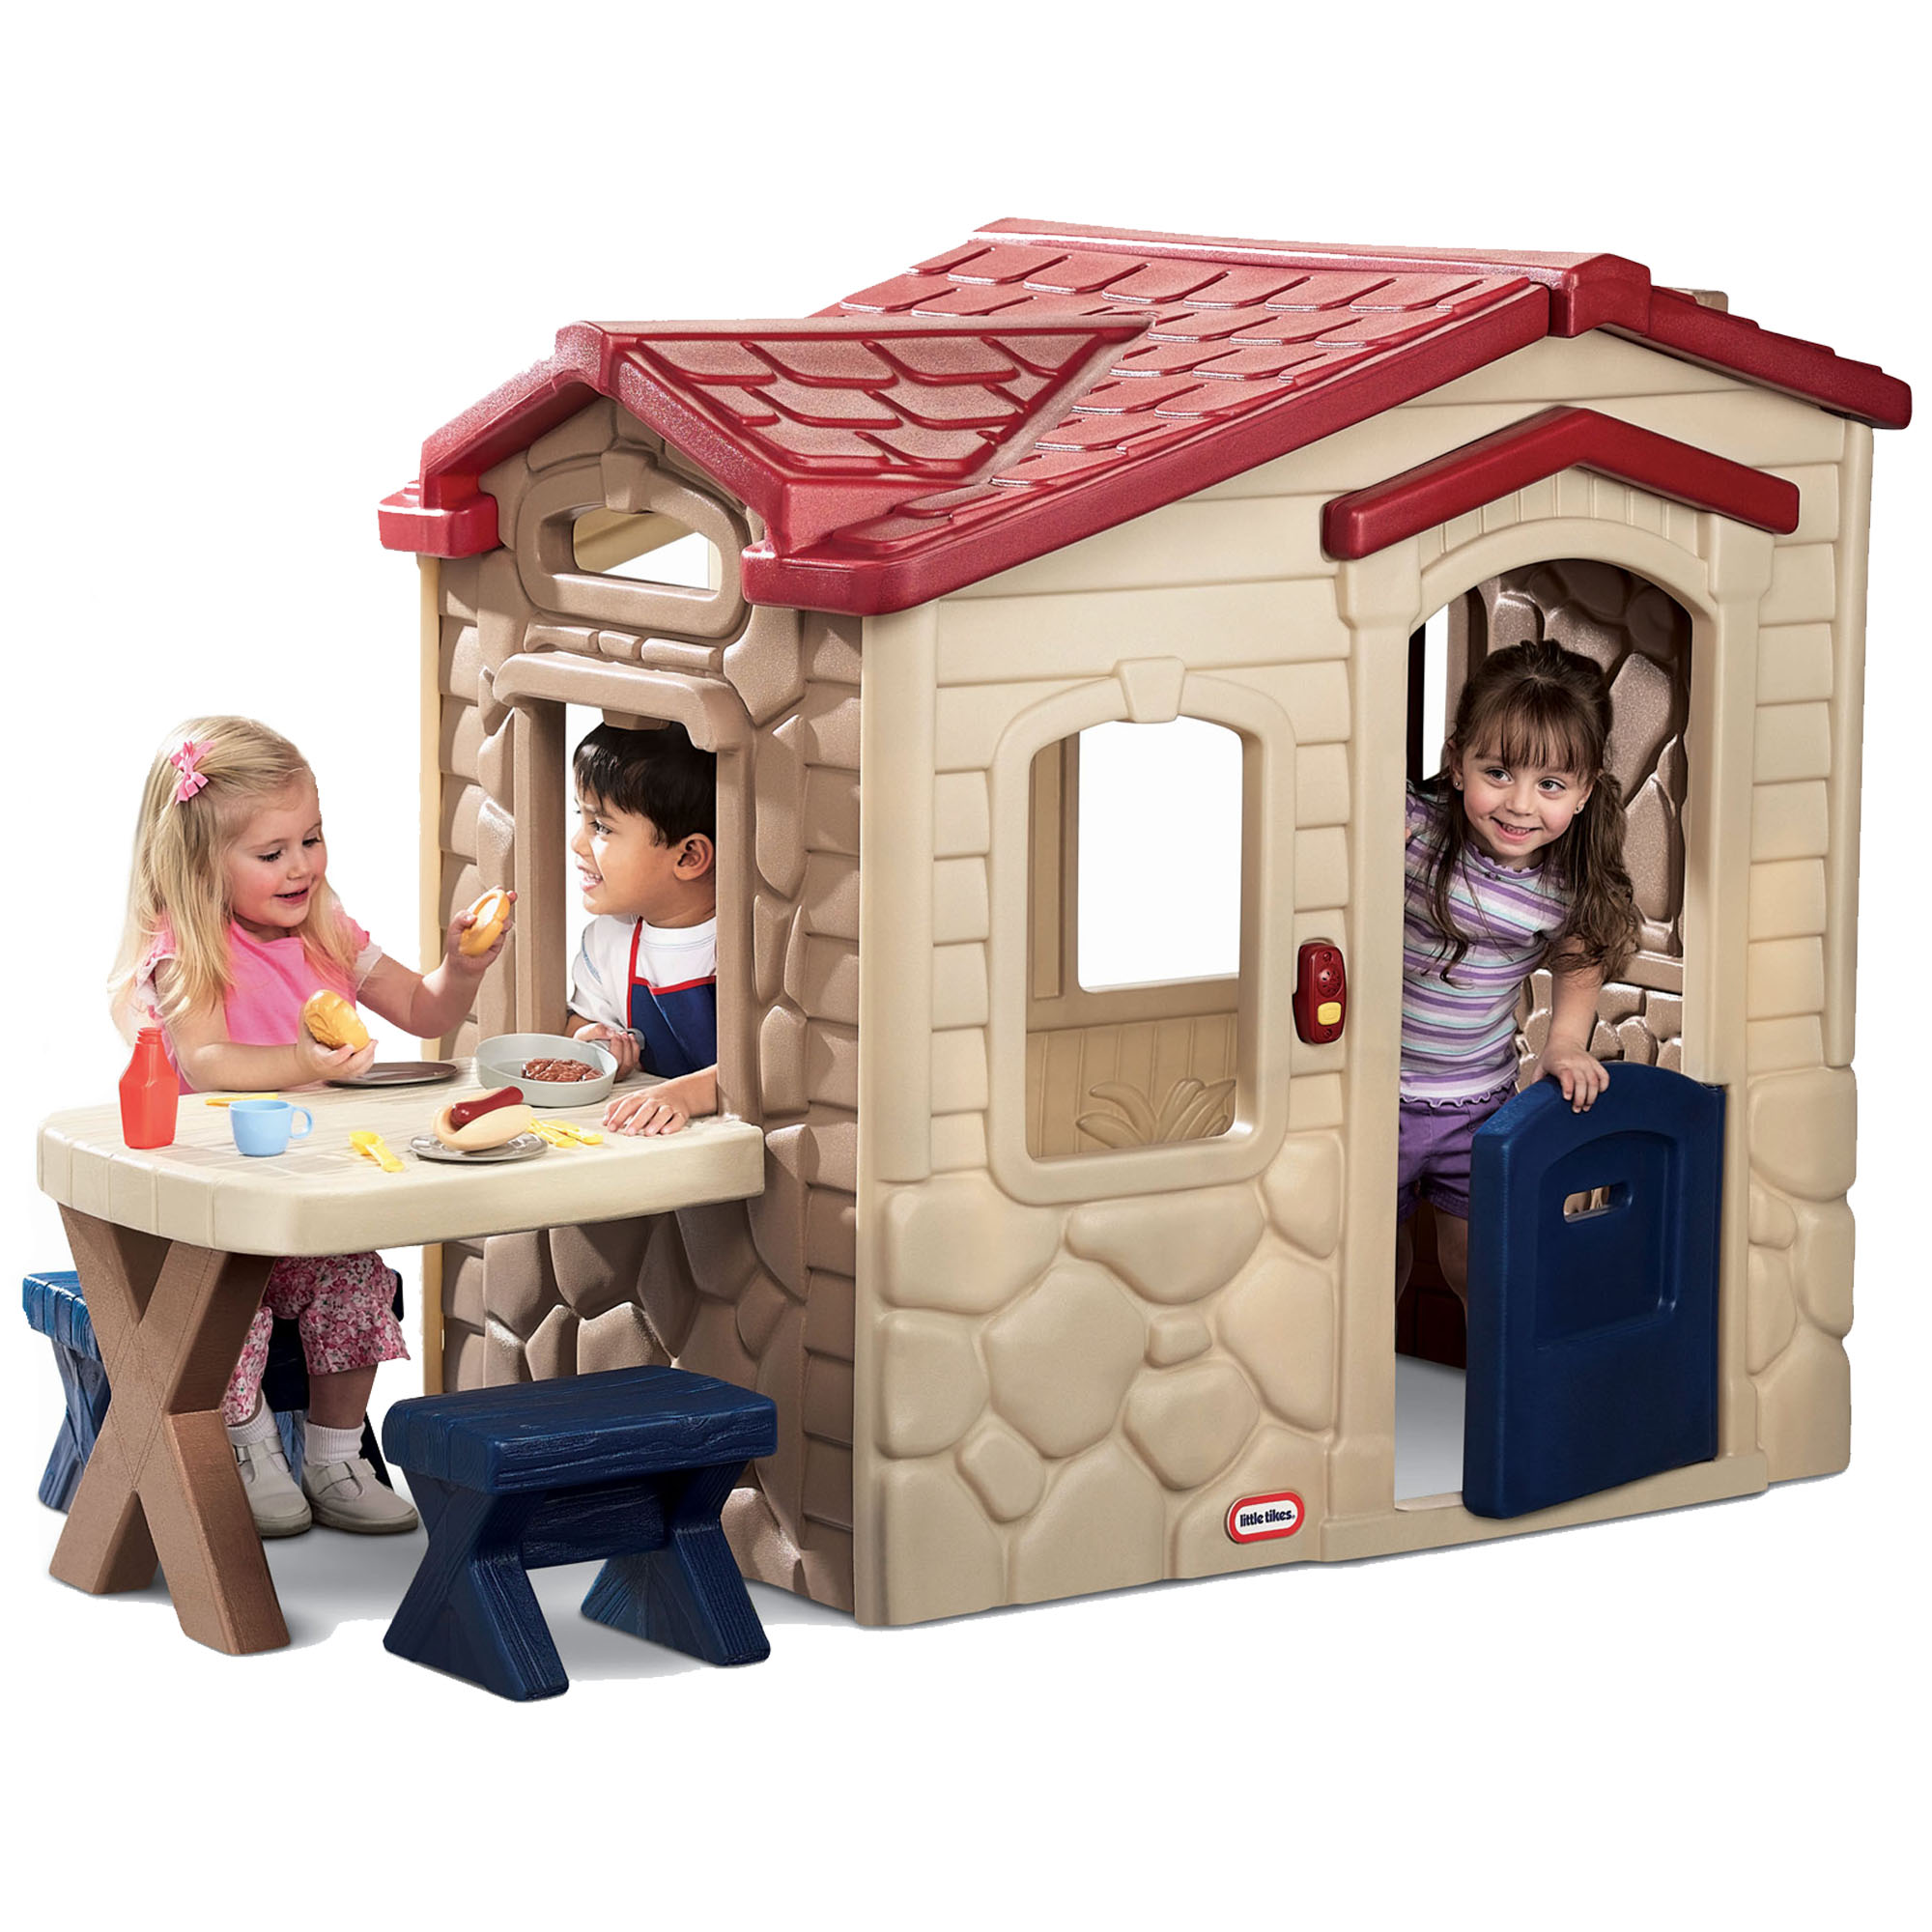 Little Tikes Picnic on the Patio Playhouse with 20 Play Accessories, Working Doorbell, Indoor and Outdoor Backyard Toy, Tan- For Kids Toddlers Boys Girls Ages 2 3 4+ Year Old - image 1 of 5